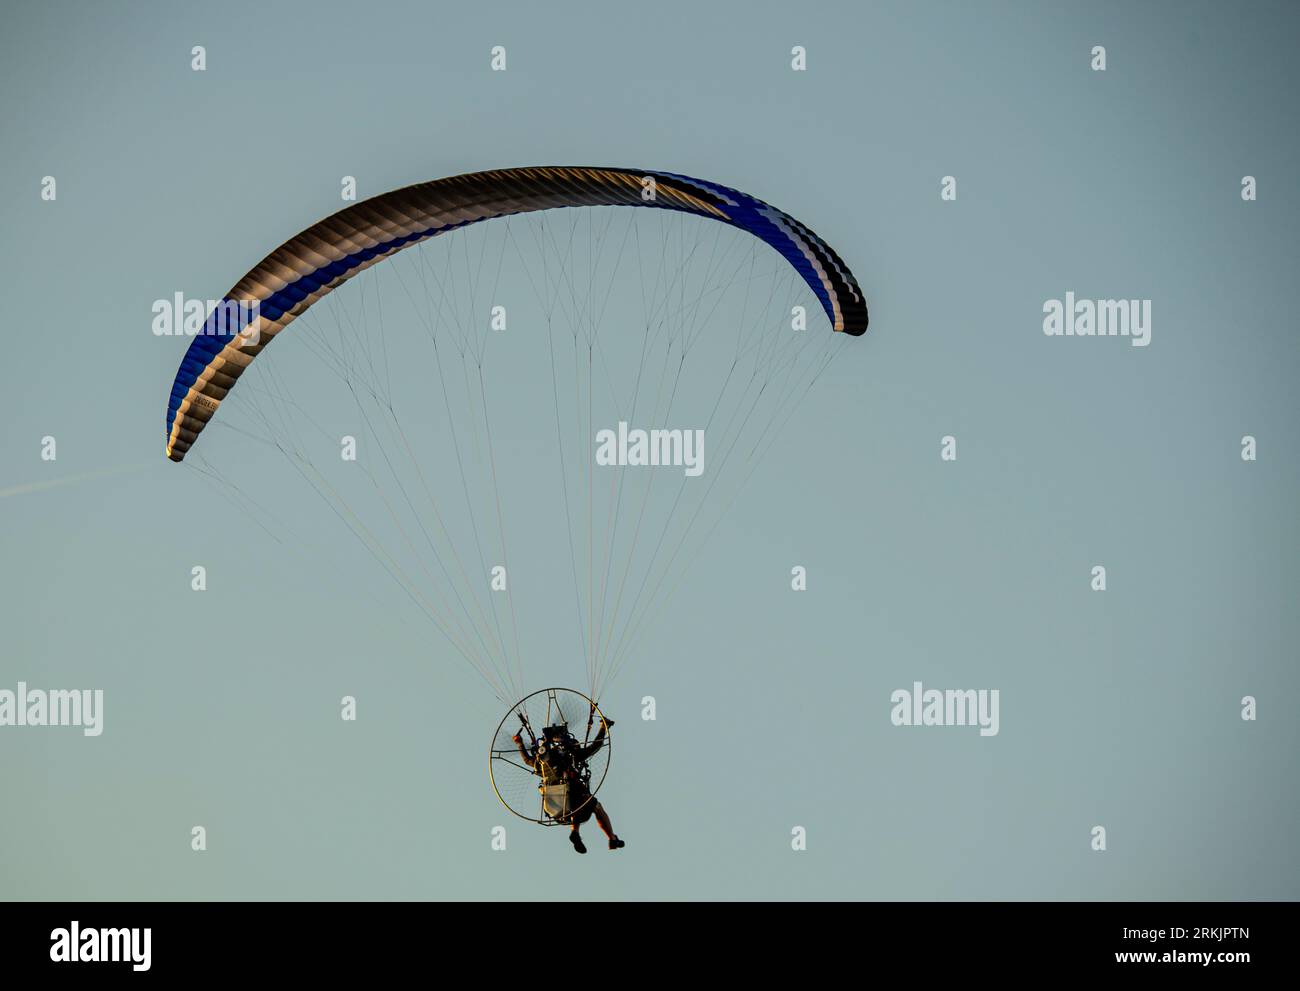 planes, light aircraft, motor gliders, paragliders, sport and adrenaline Stock Photo